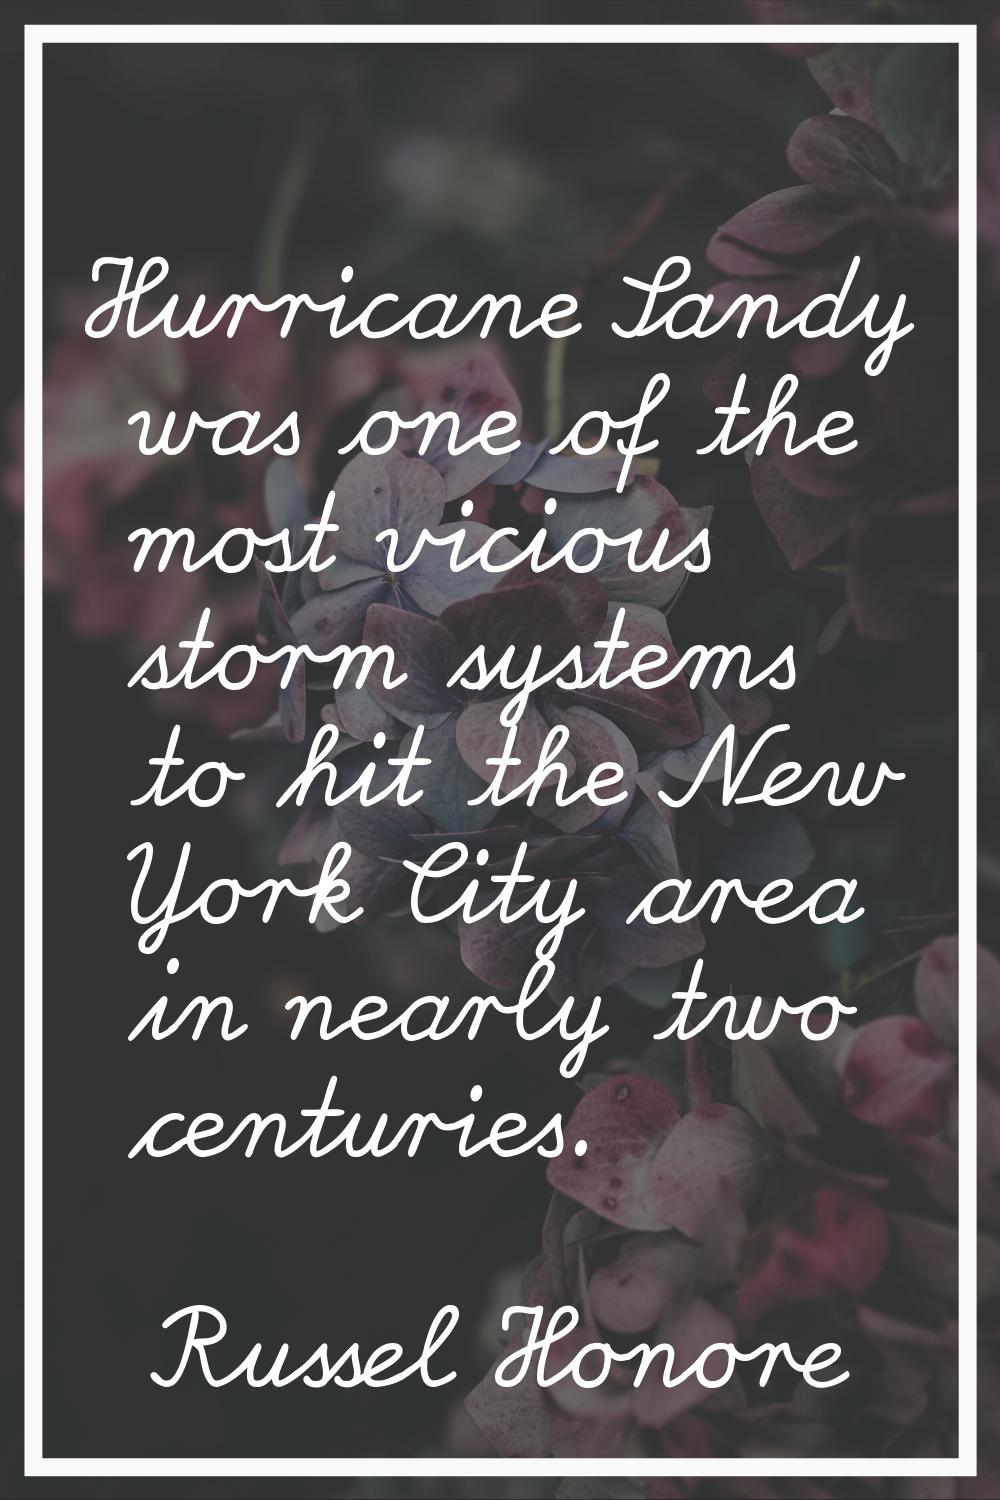 Hurricane Sandy was one of the most vicious storm systems to hit the New York City area in nearly t